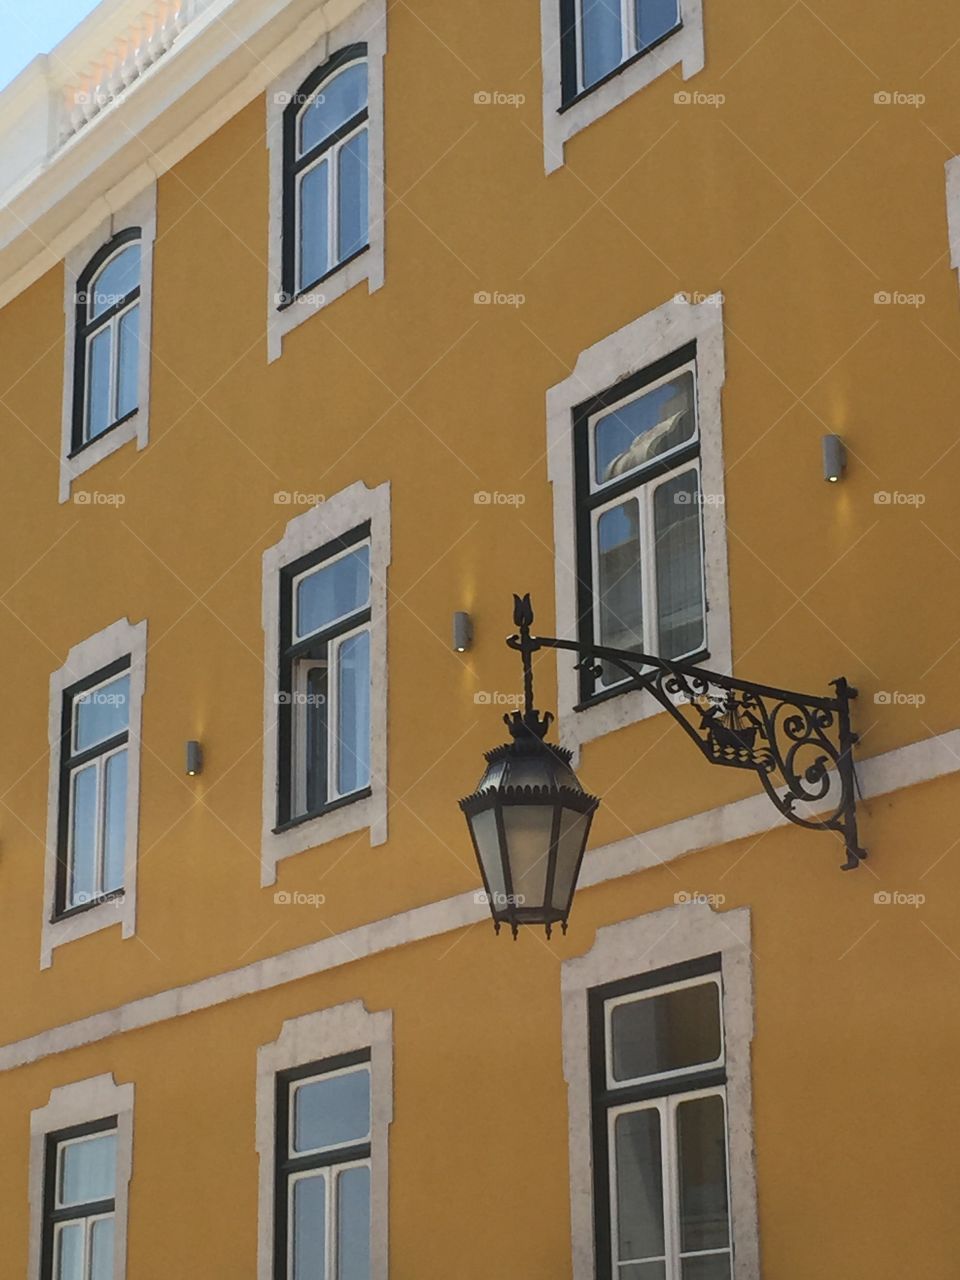 Lisbon. Loved the mustard color and the lamps along the sides of the buildings.